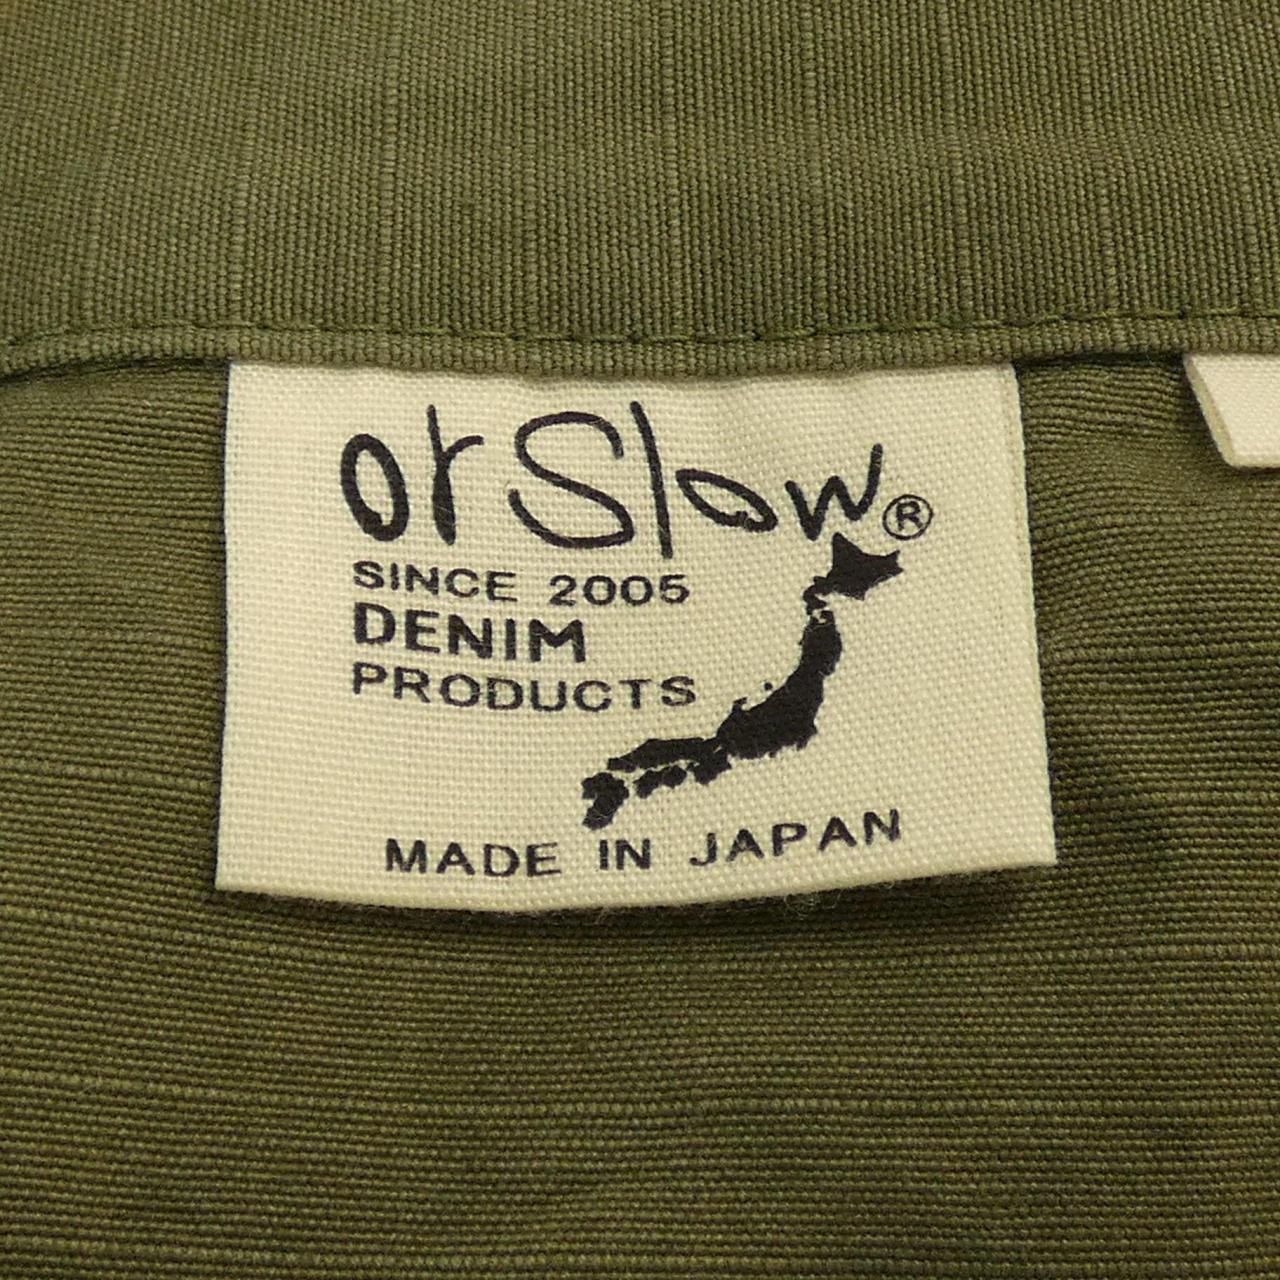 OR SLOW OR SLOW shirt